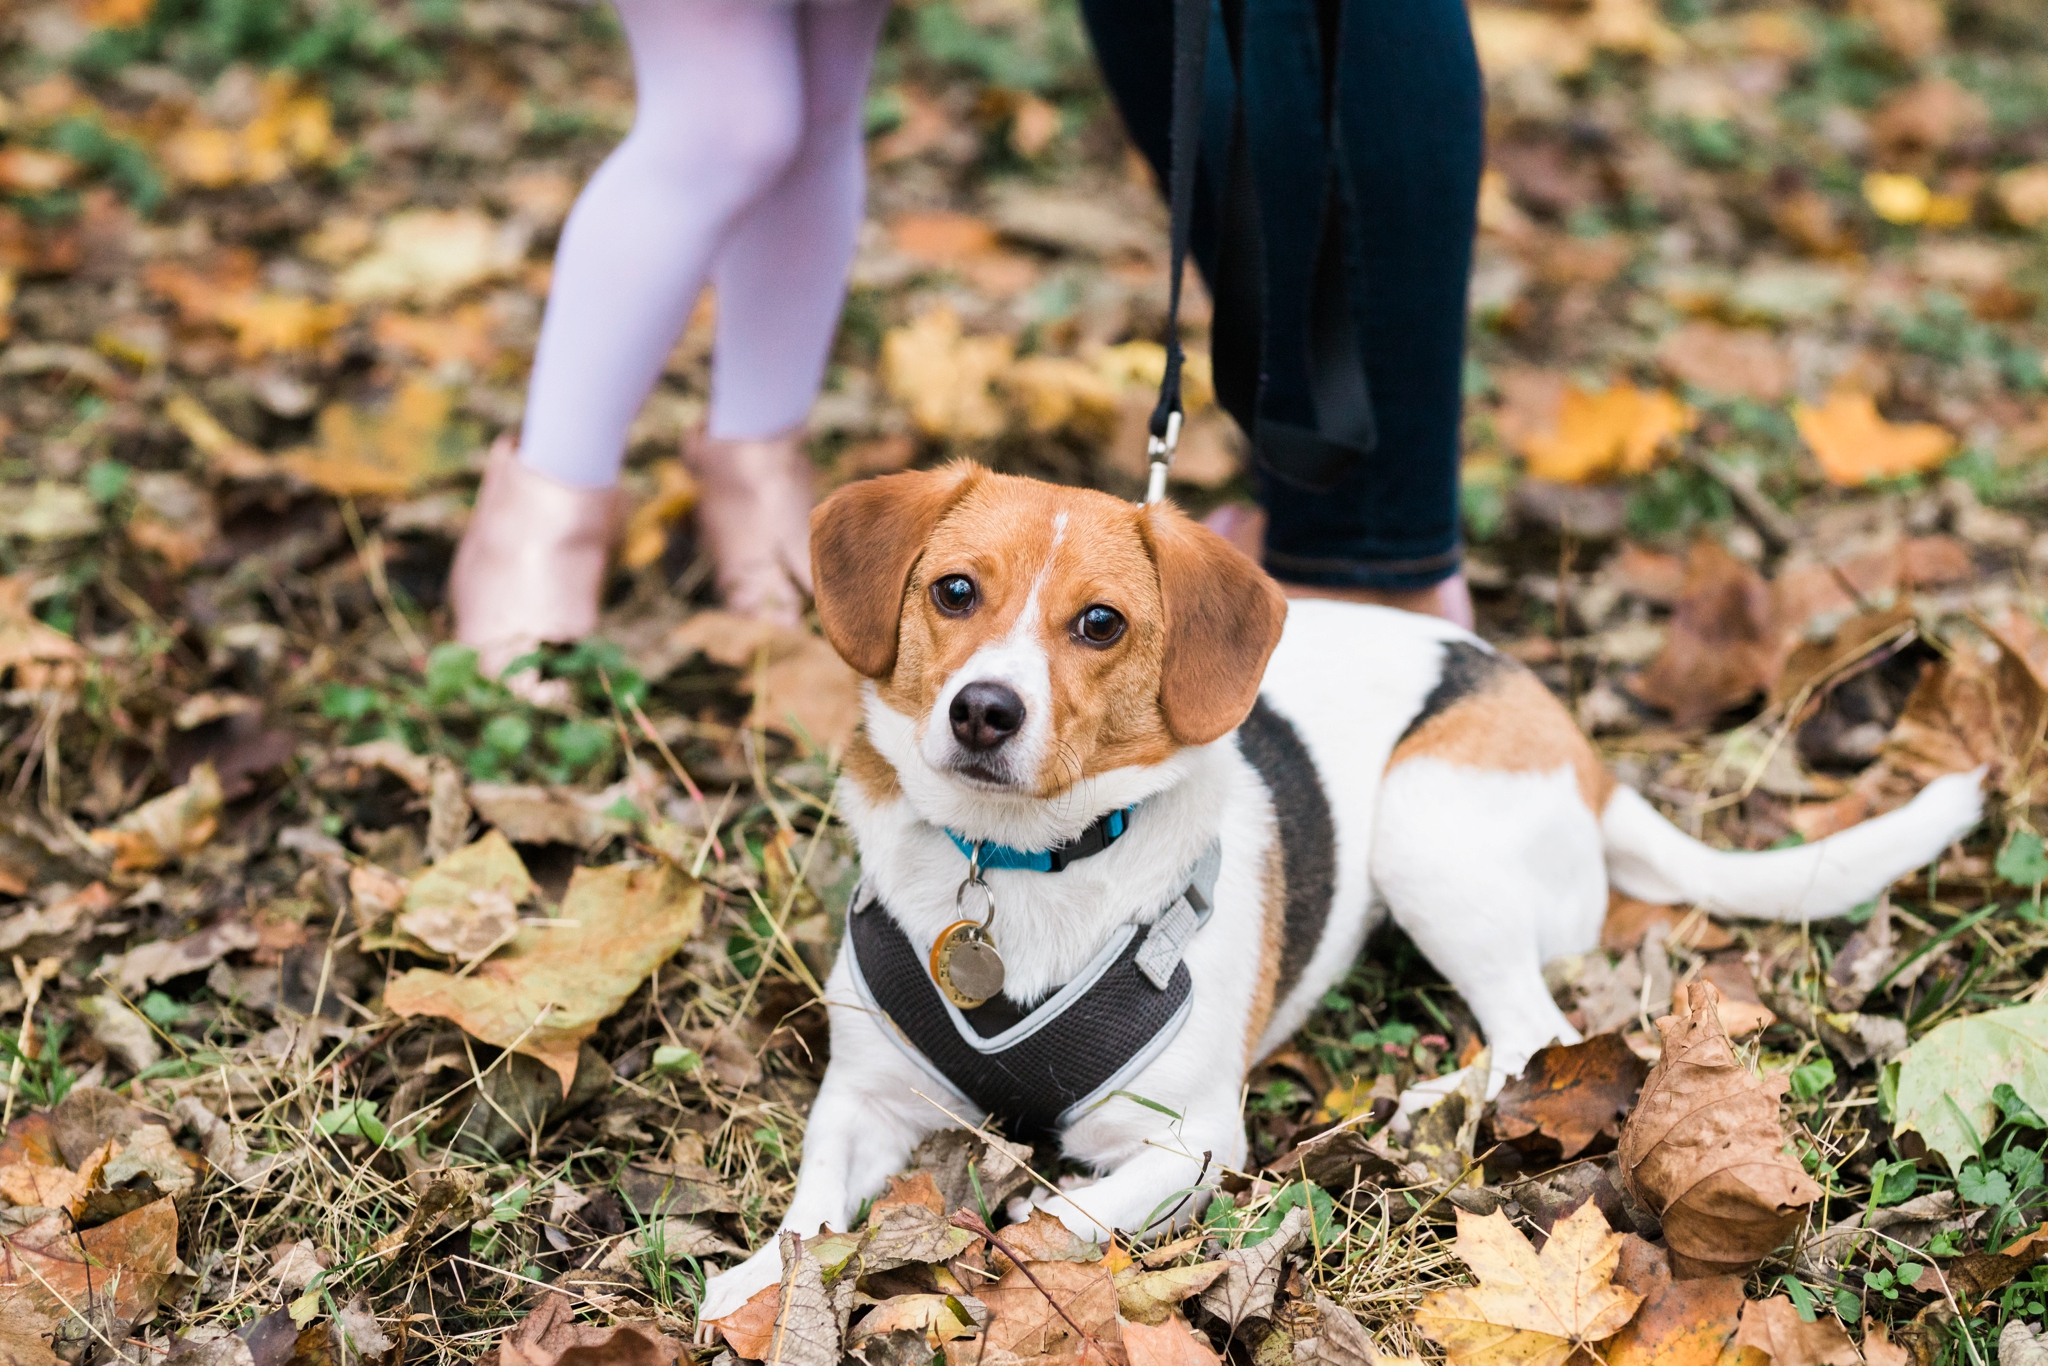 Emily Grace Photography, Lancaster PA Lifestyle Photographer, Marietta PA Photos, Fall Family Portraits with Dog